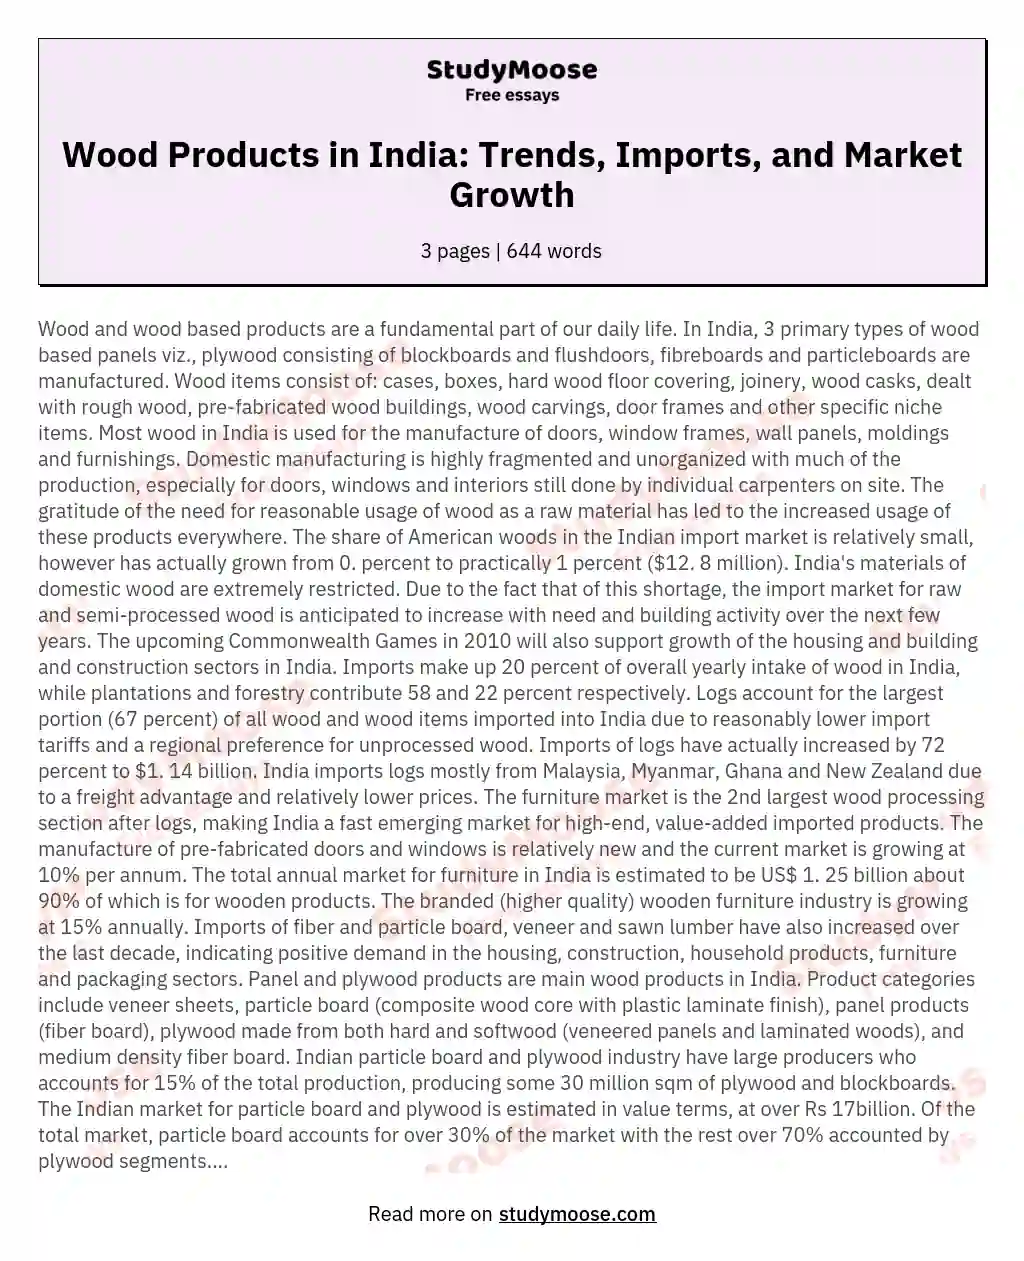 Wood Products in India: Trends, Imports, and Market Growth essay